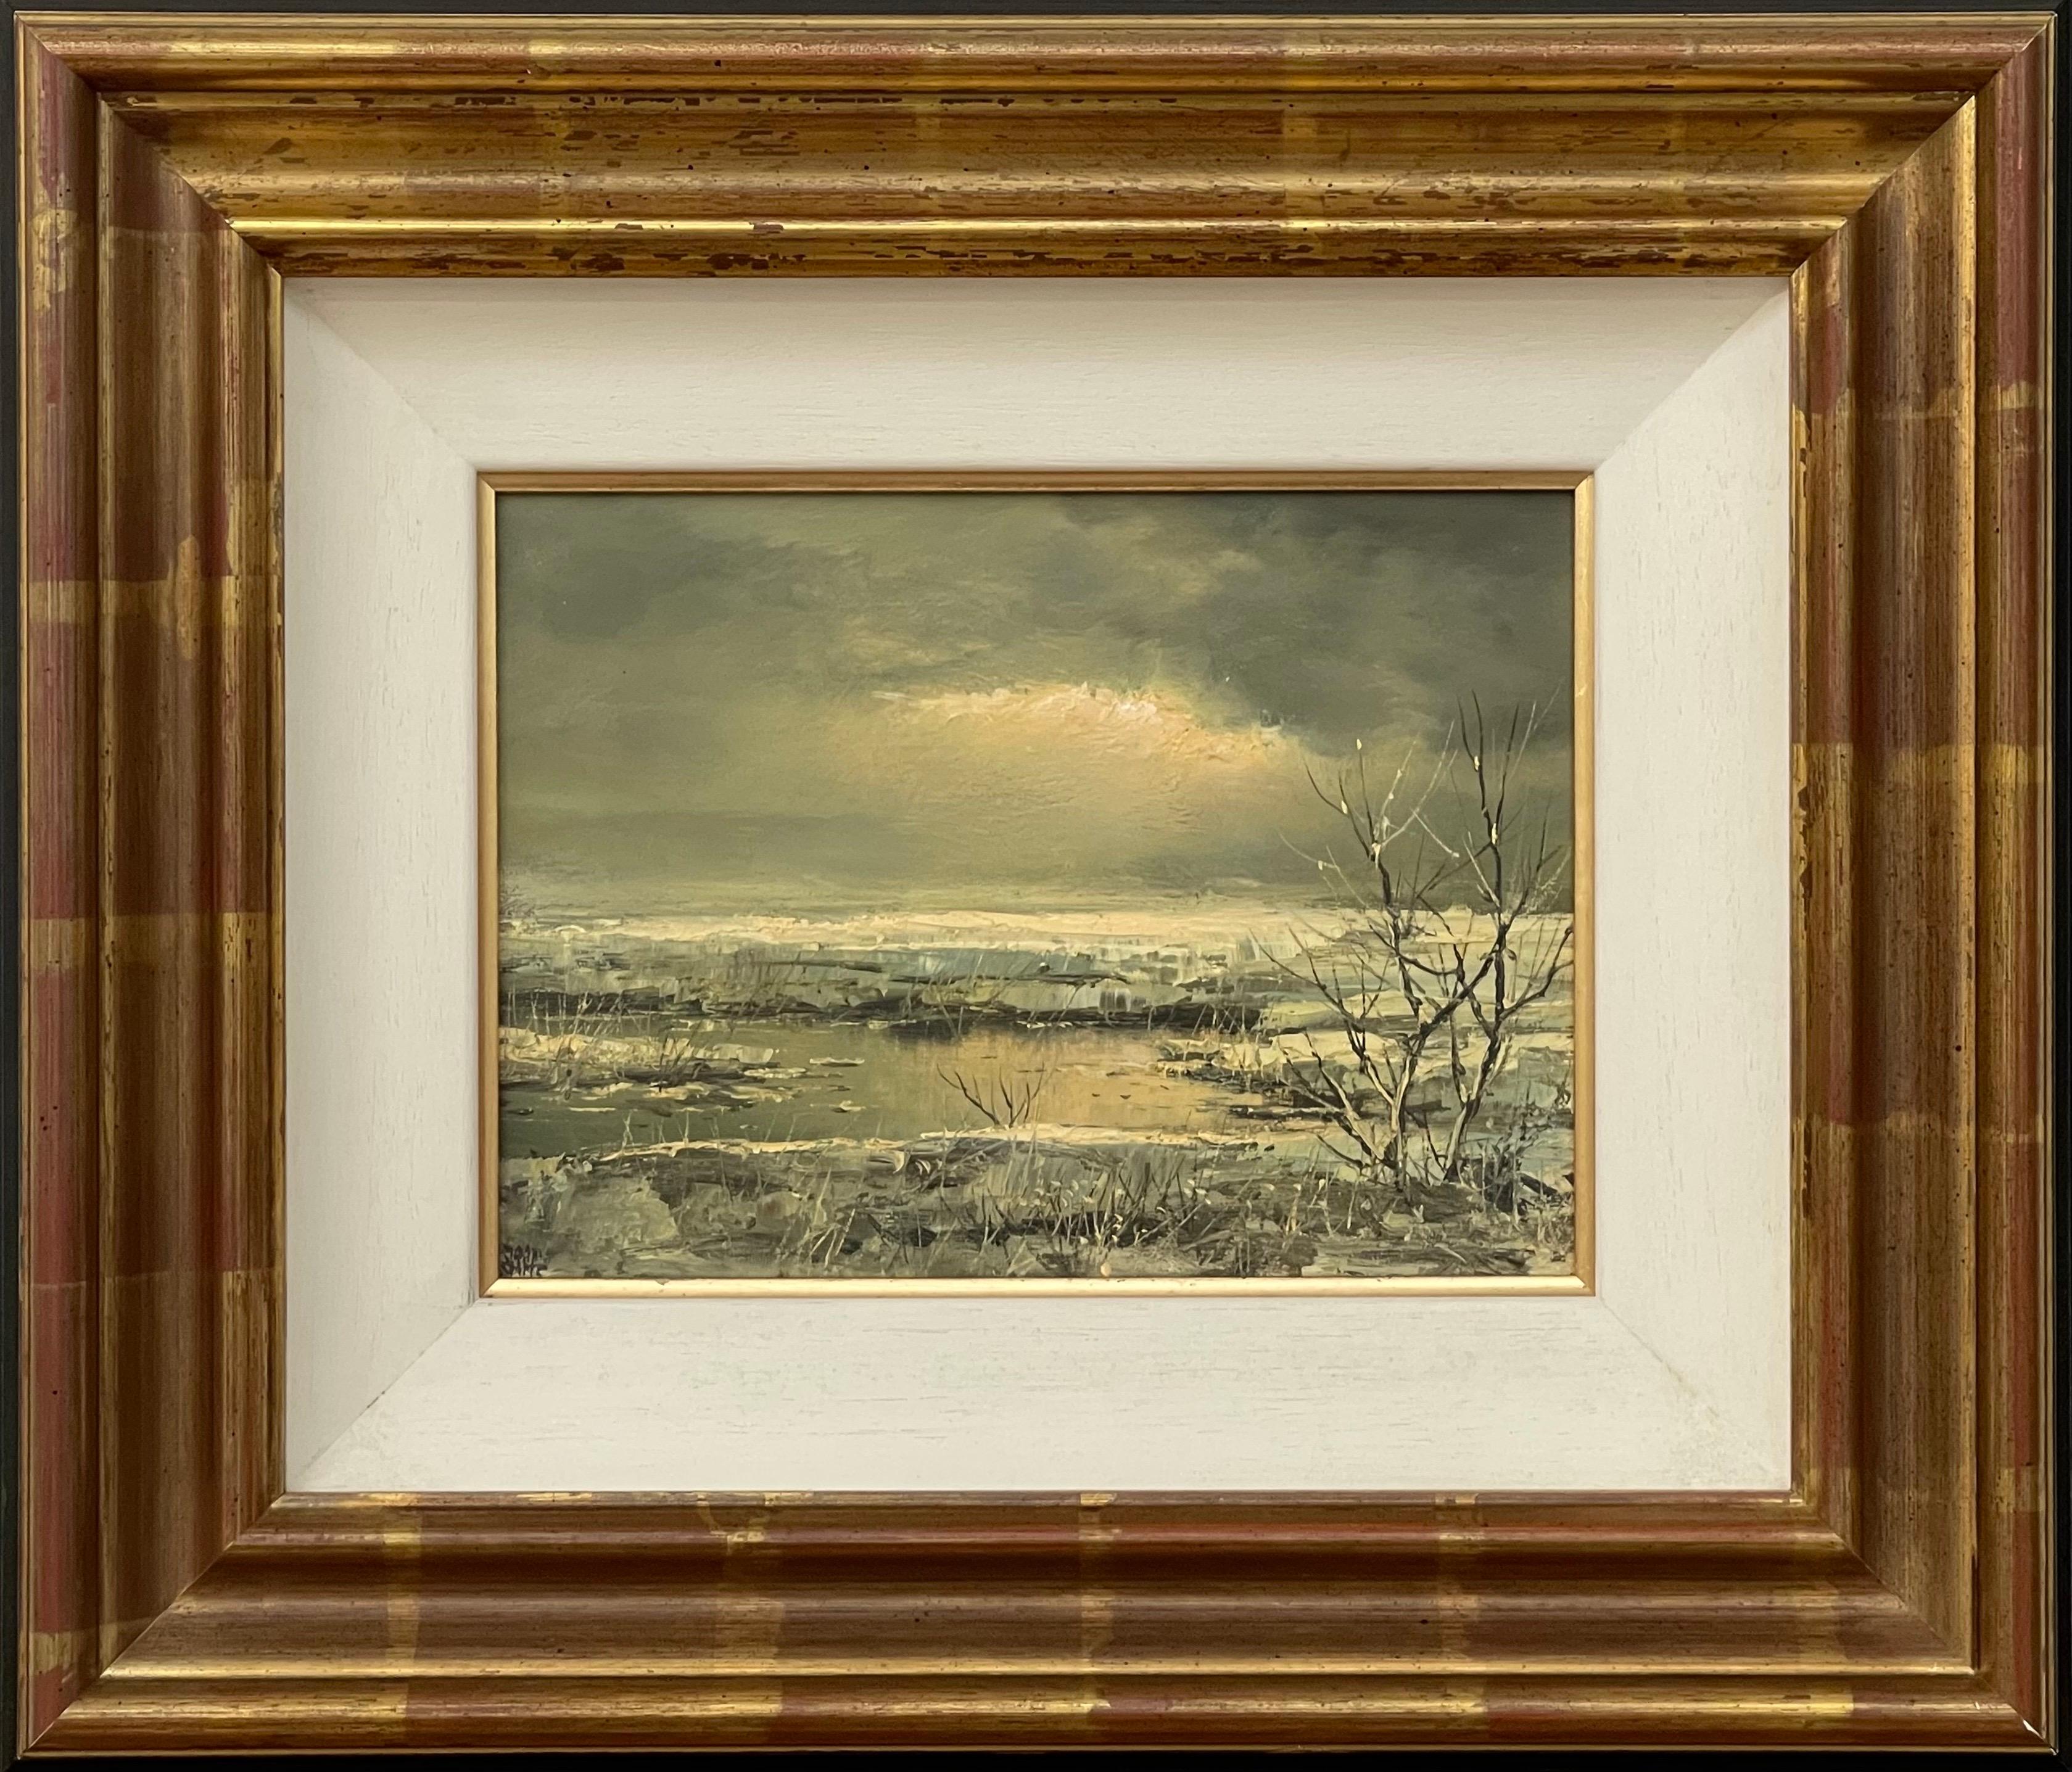 Joop Smits Landscape Painting - Small Oil Painting of Winter Landscape by 20th Century Dutch Artist